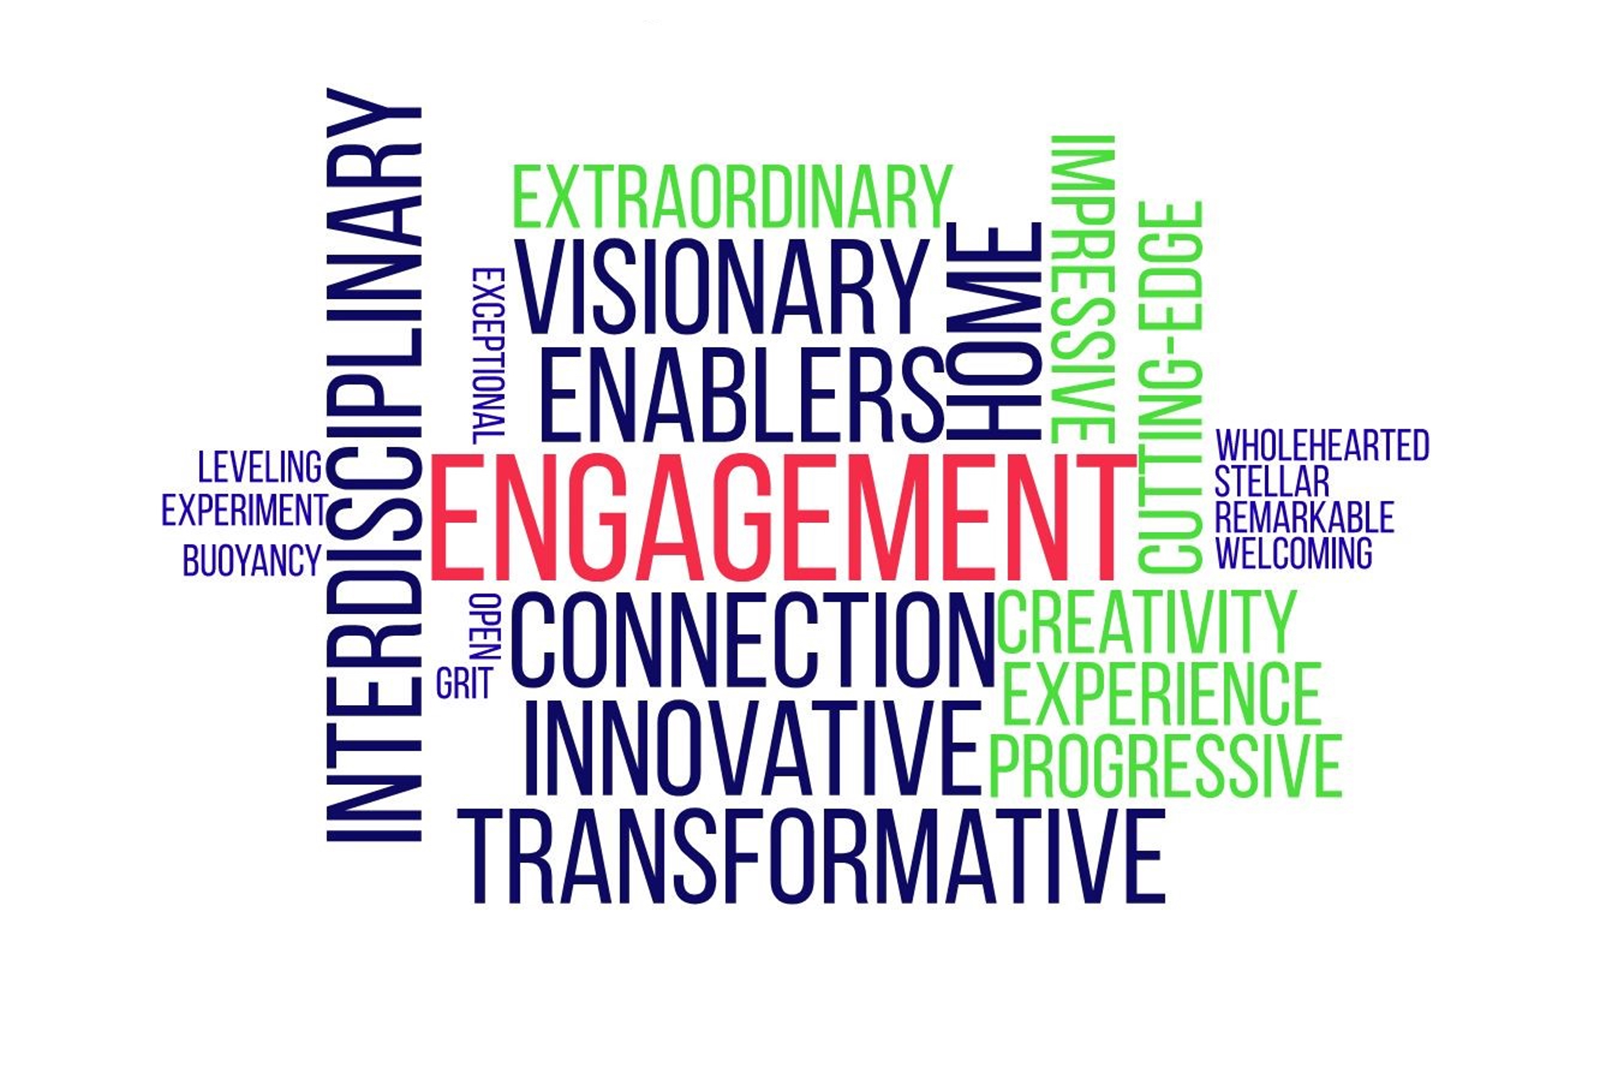 A graphic word cloud that describe the vision and qualities the staff of the DMC aspire to foster: engagement, connection, visionary, creative, experience and much more